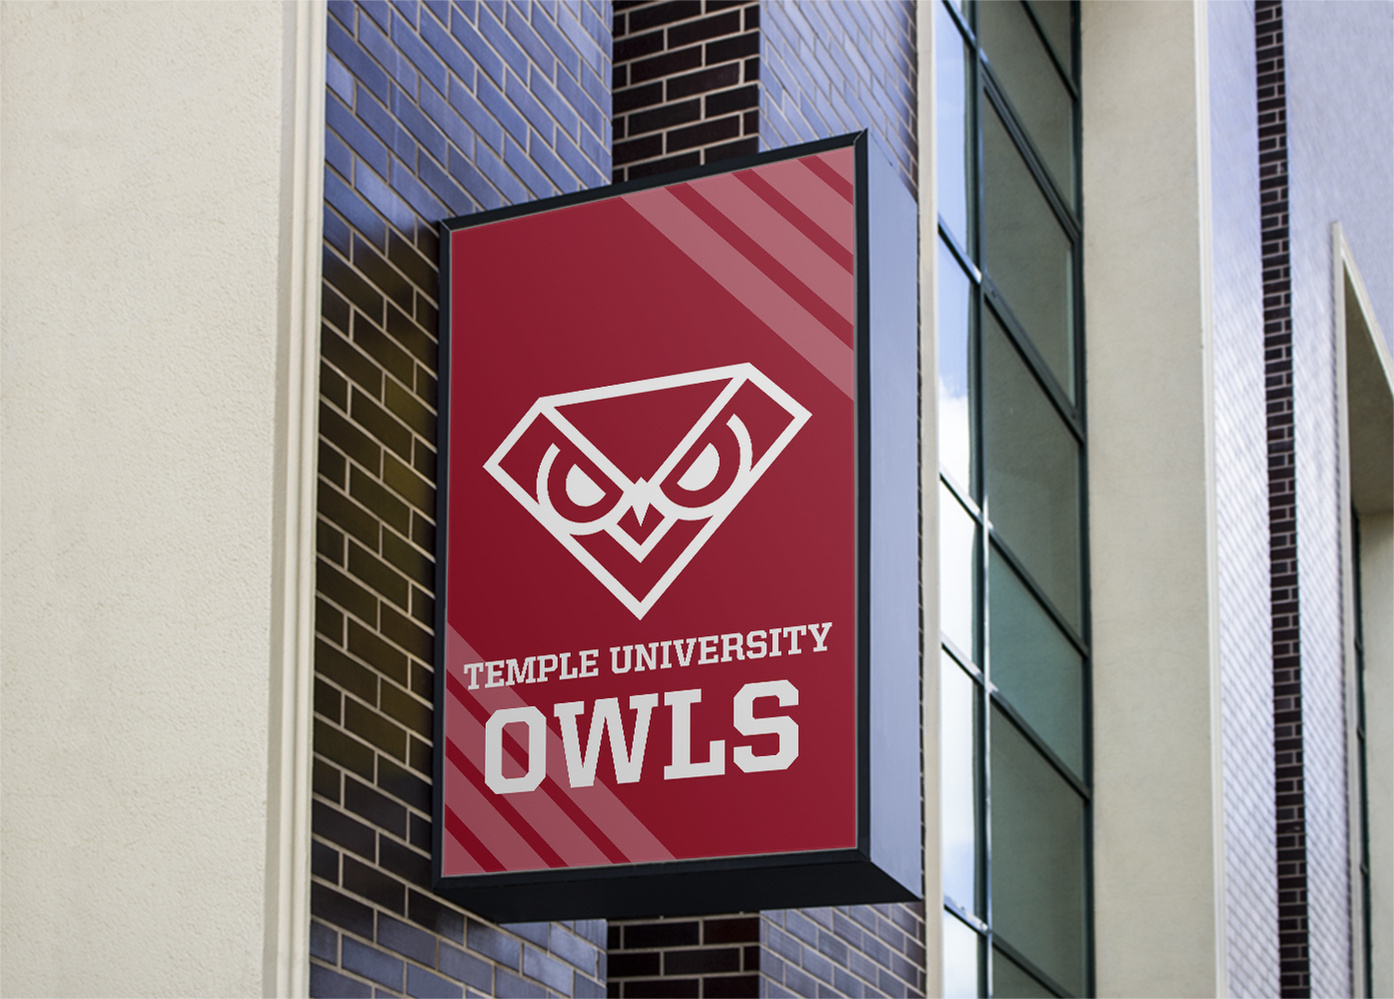 Proposed Temple Owl logo on building sign